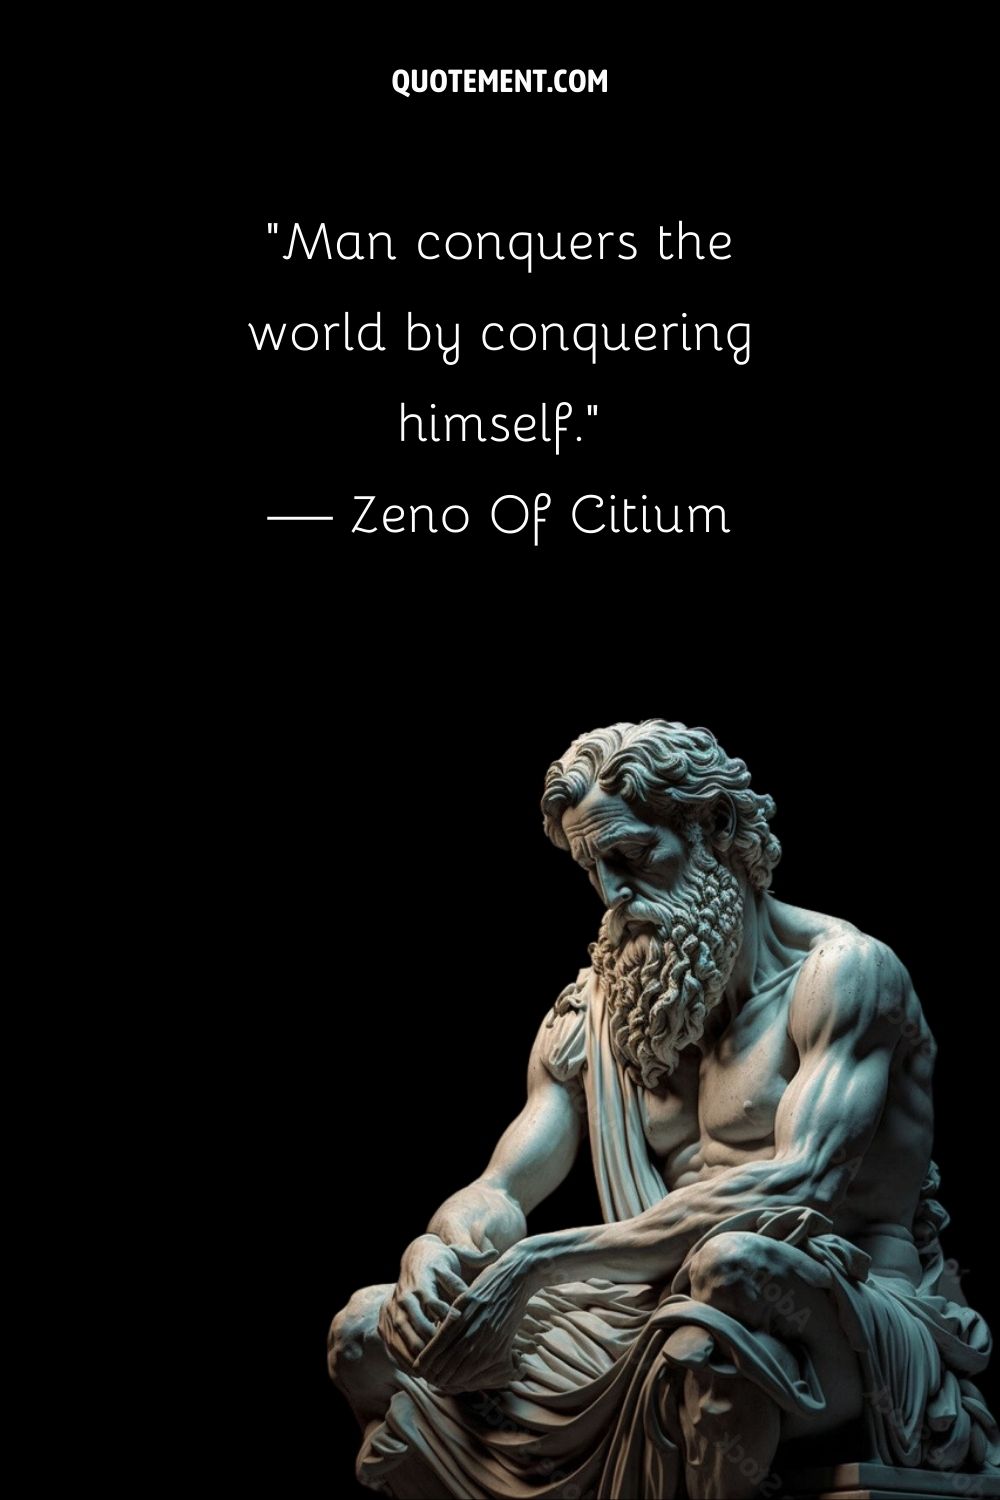 Marble sculpture of a stoic philosopher representing the greatest stoic quote.